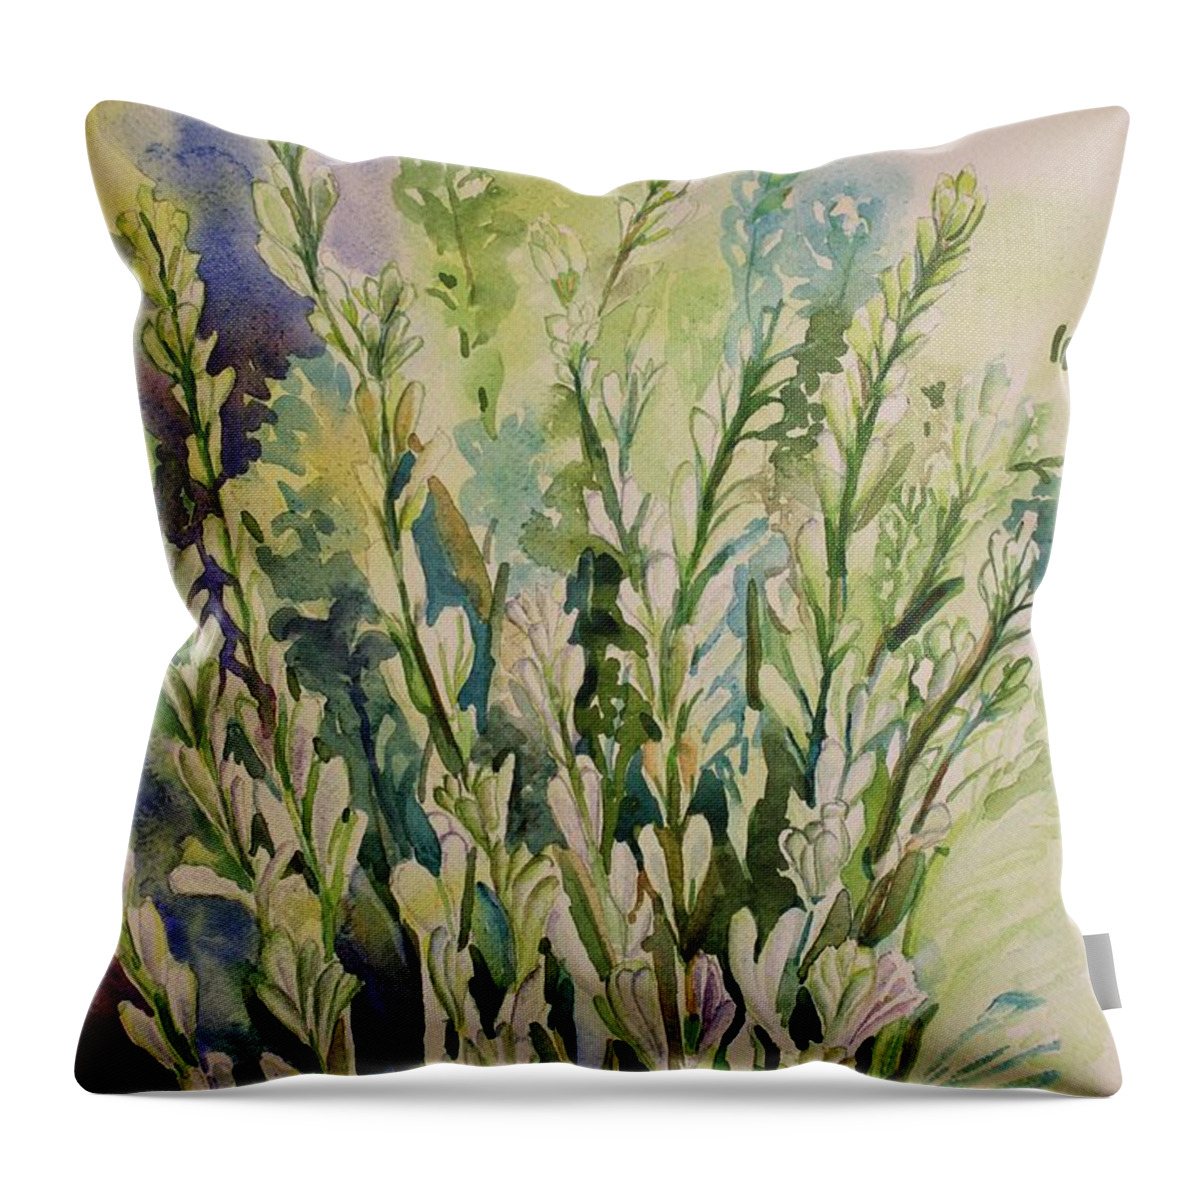 Tuberose Throw Pillow featuring the painting Still life of Tuberose Flowers by Geeta Yerra